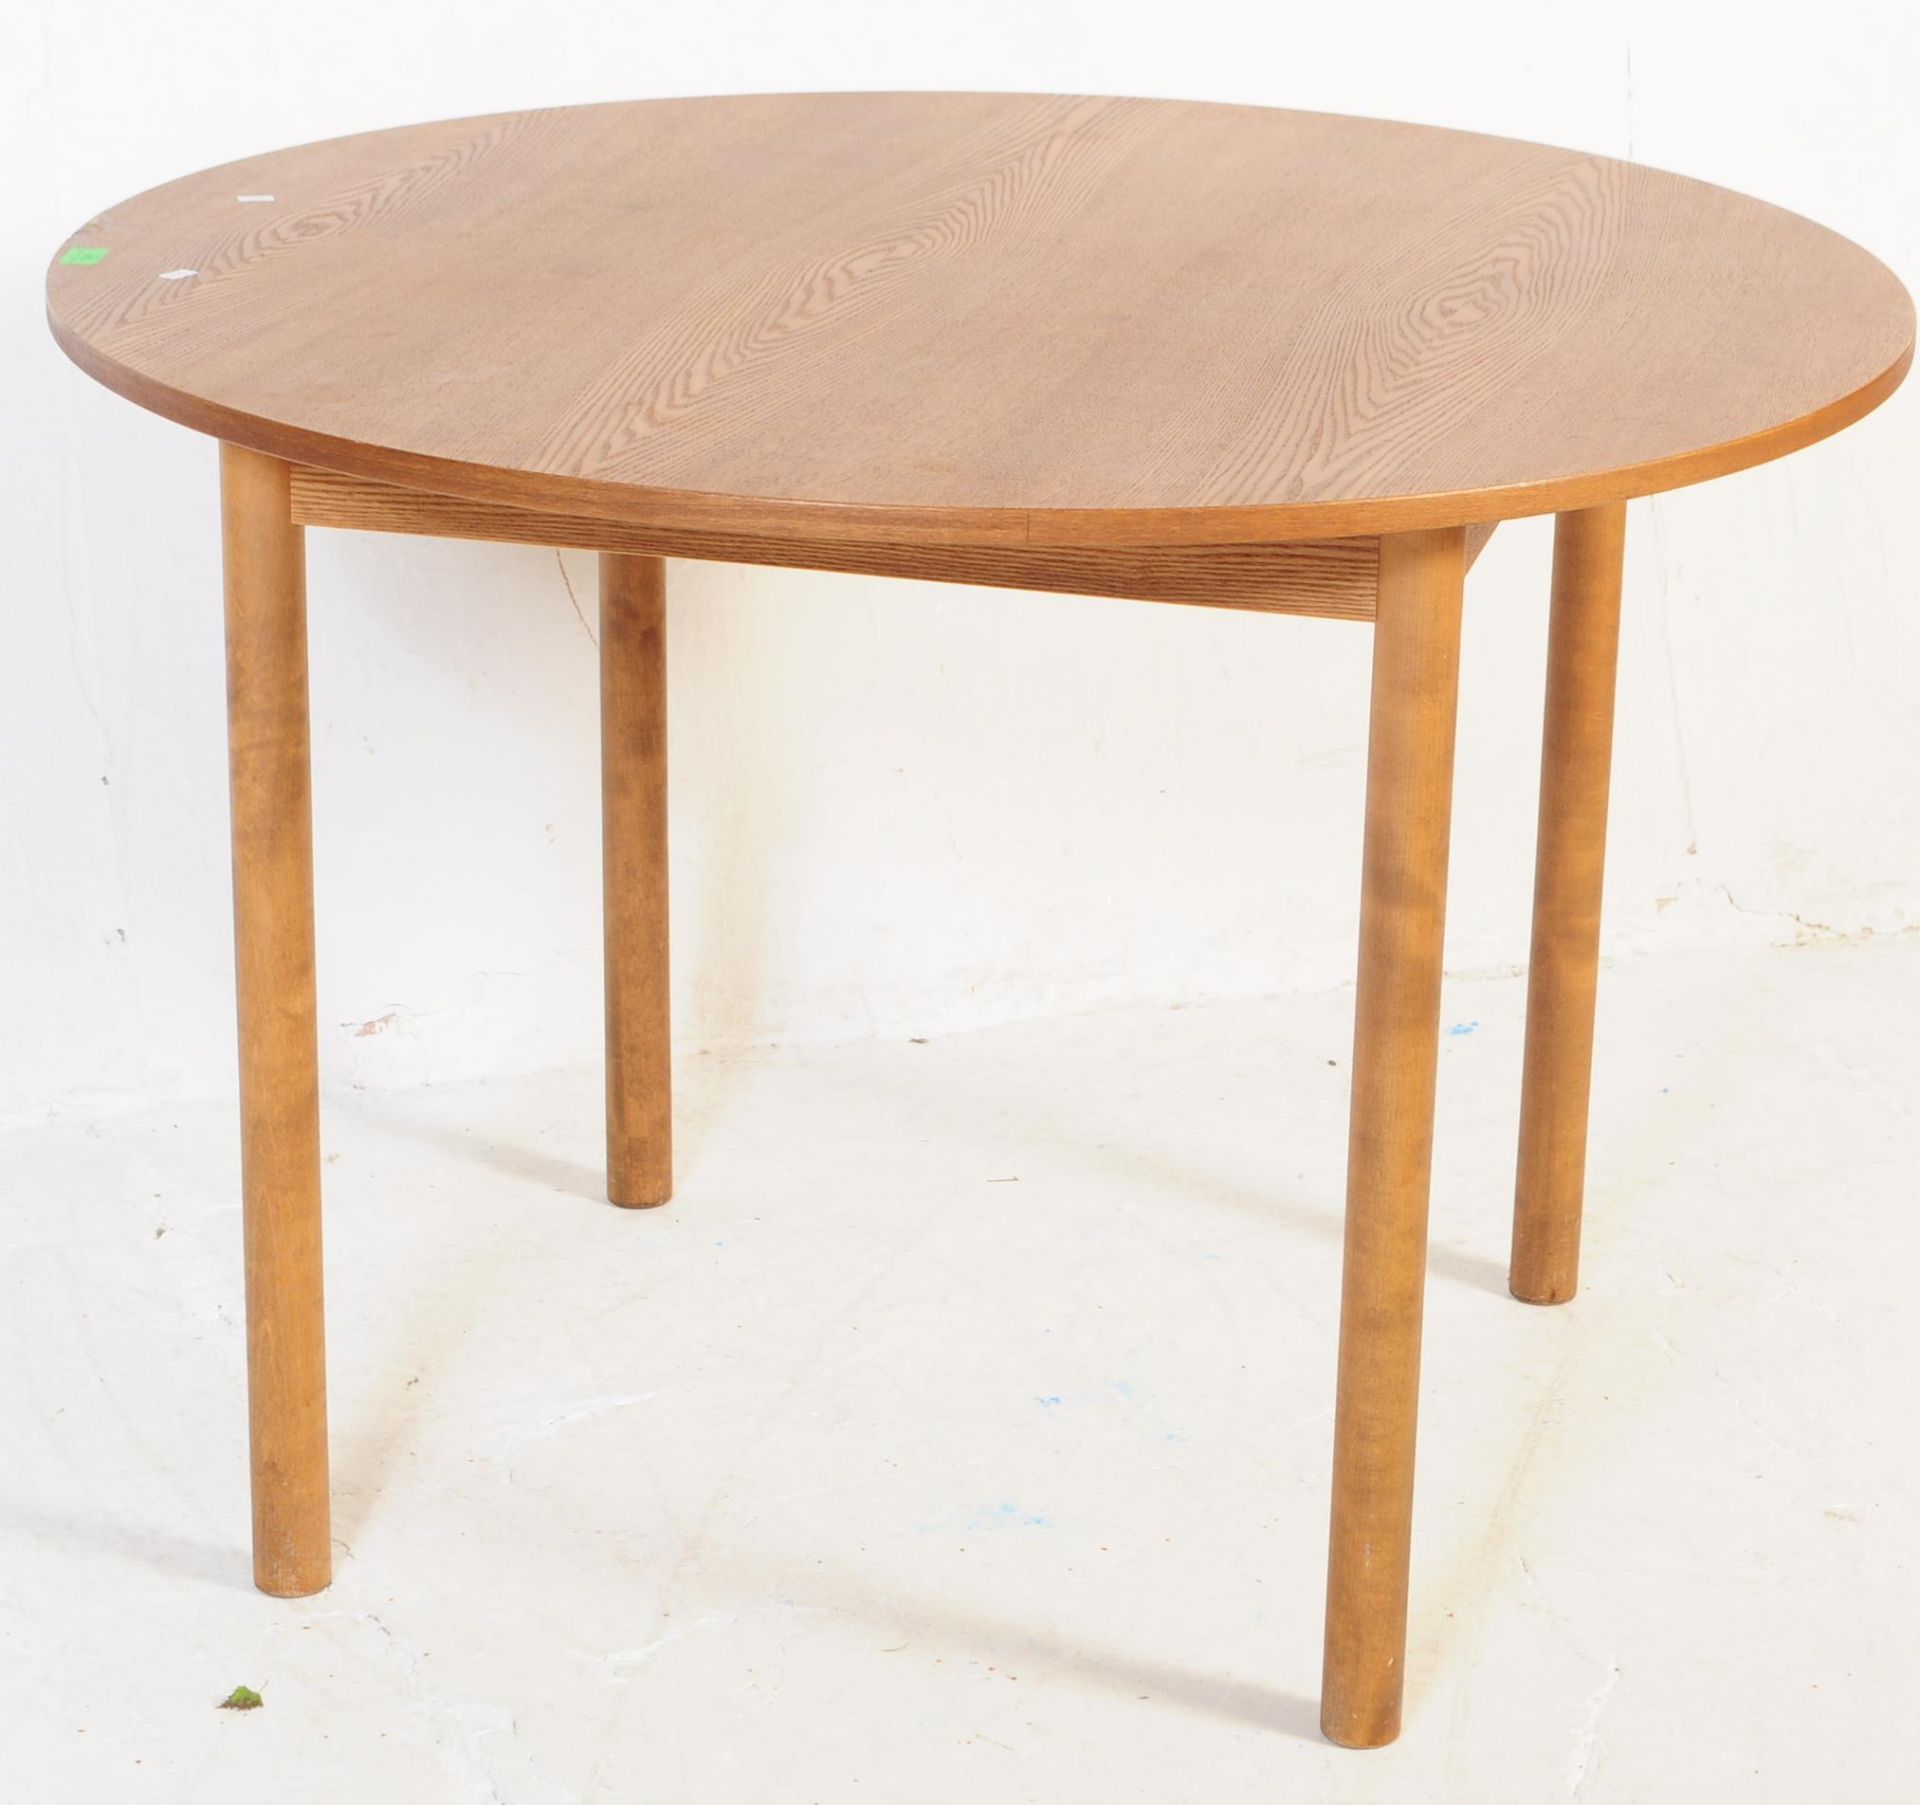 RETRO MID 20TH CENTURY TEAK DINING TABLE WITH CHAIRS - Image 3 of 6